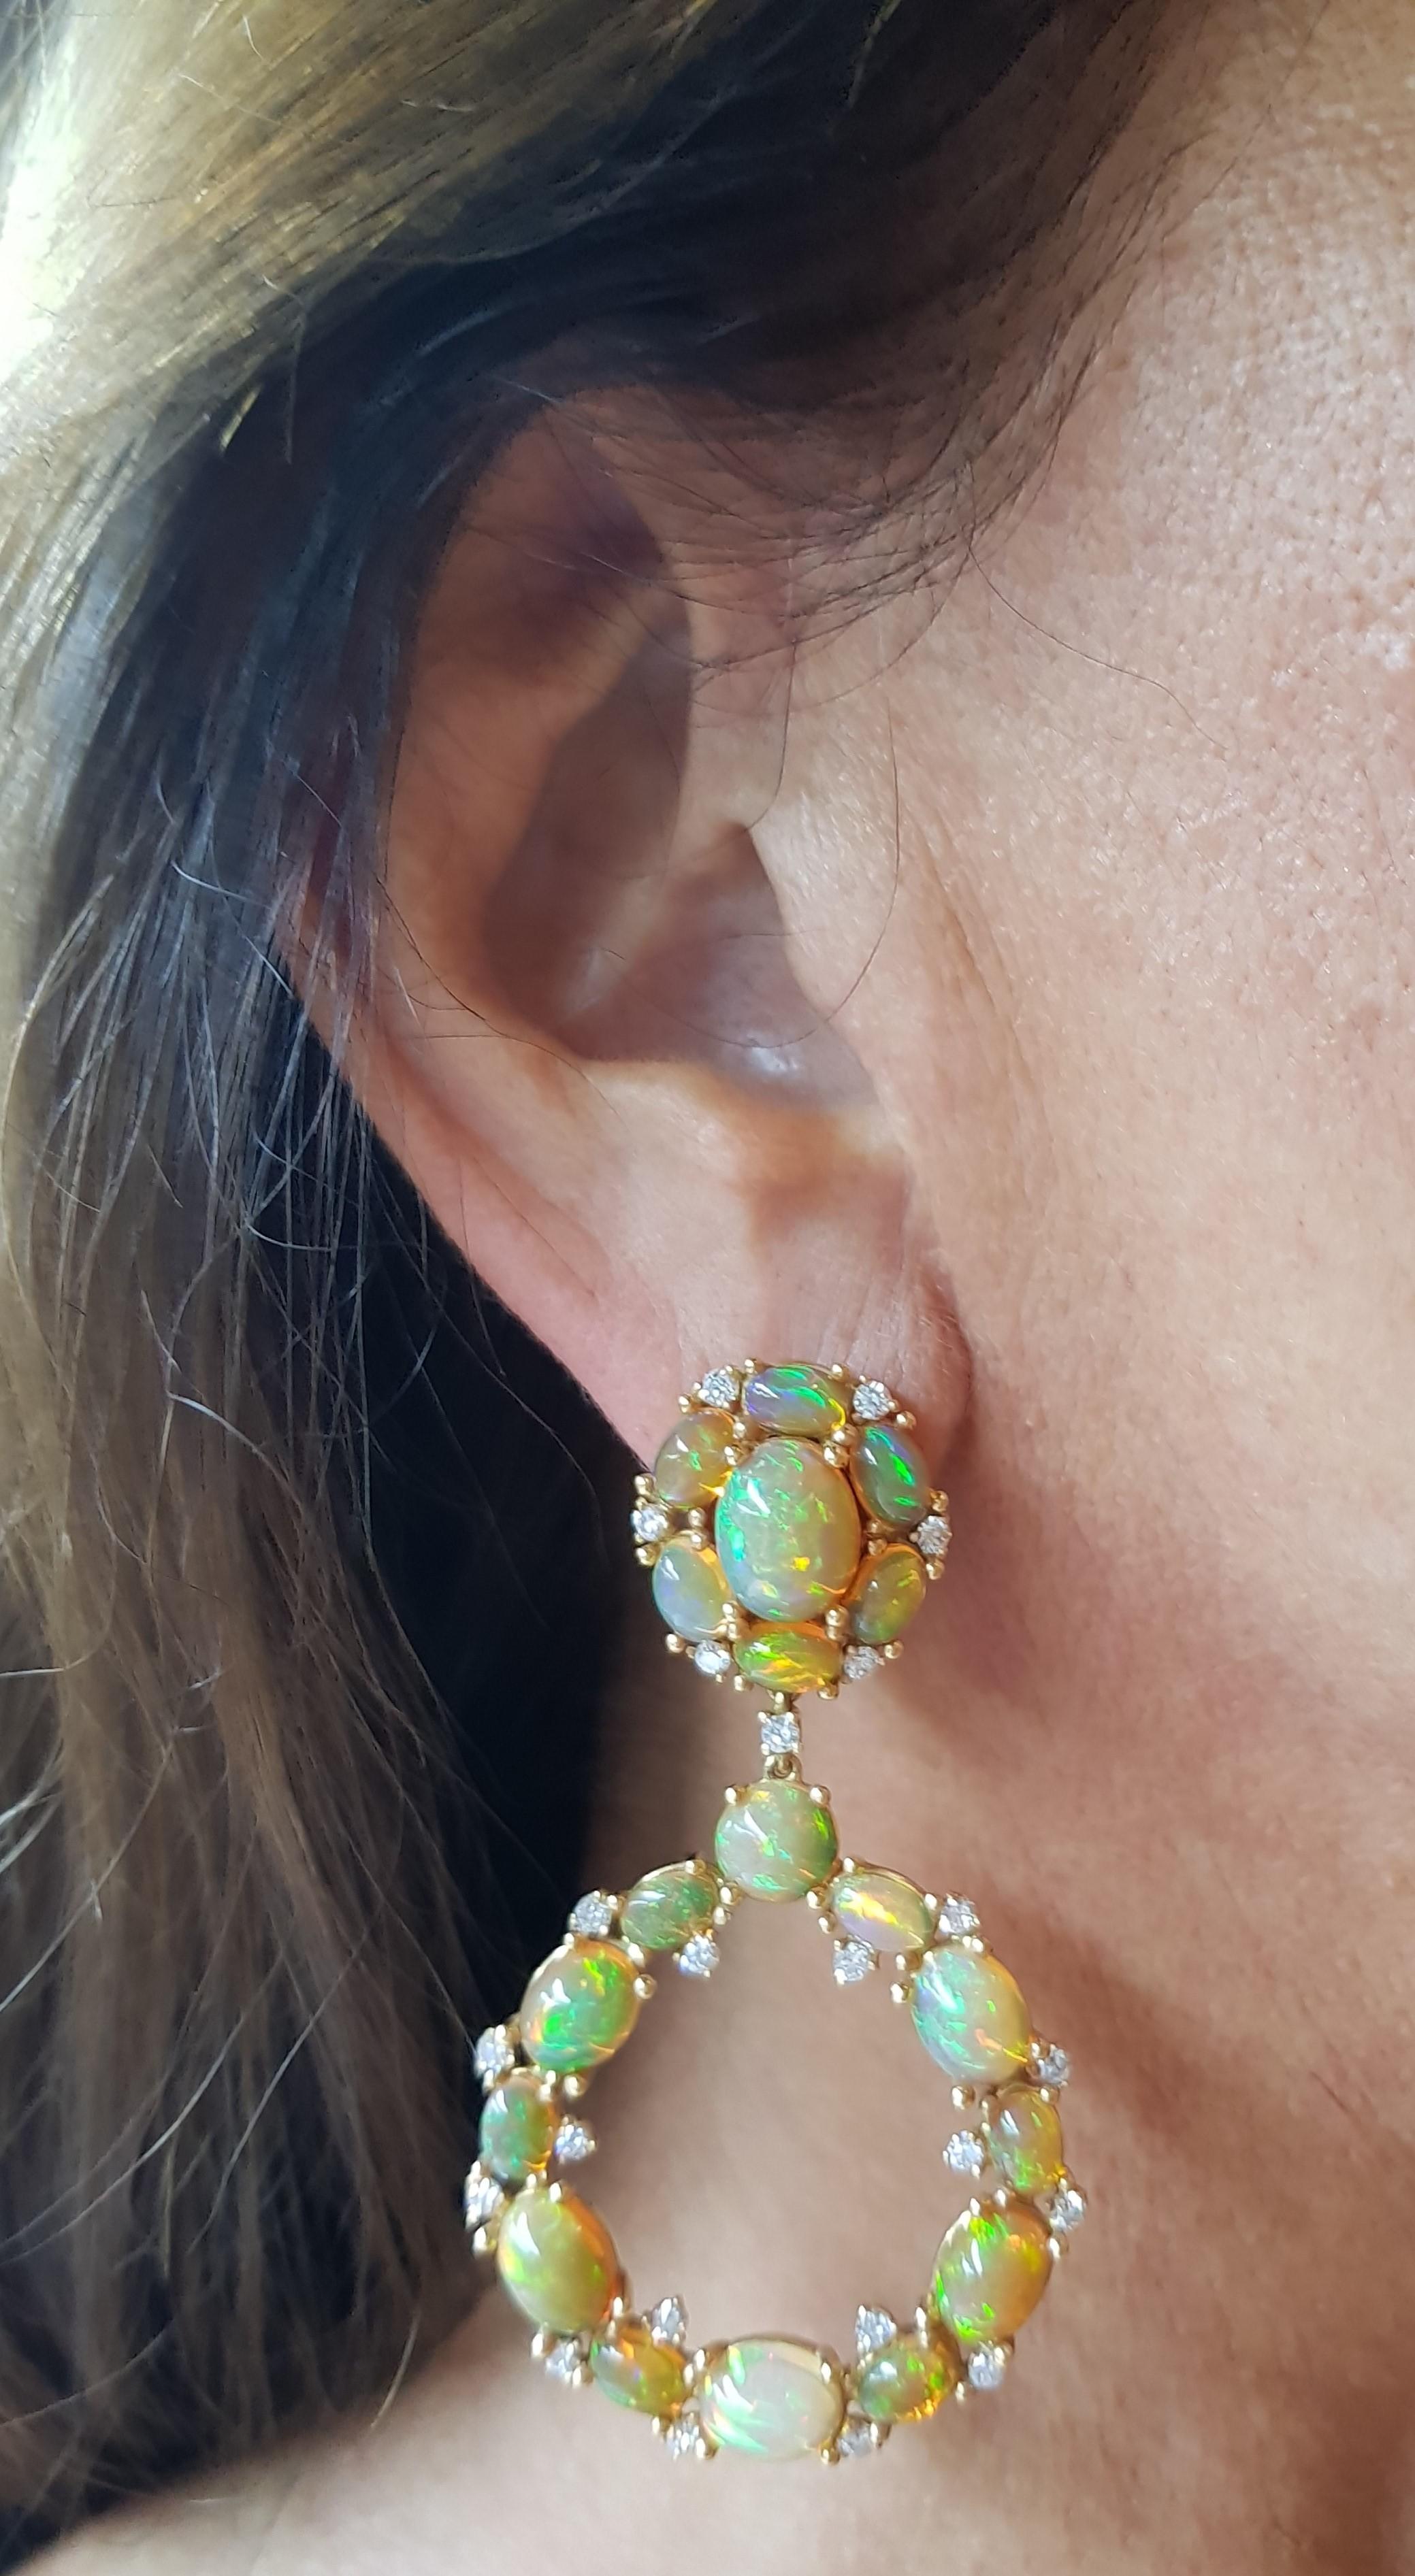 The opal has been usd for its good luck properties. Wearers enjoy the good luck that seems to attract them wearring it. In addition to symbolizing purity and hope, the opal is viewed as a powerful protector as well.
18 Karat Rose Gold Diamond 